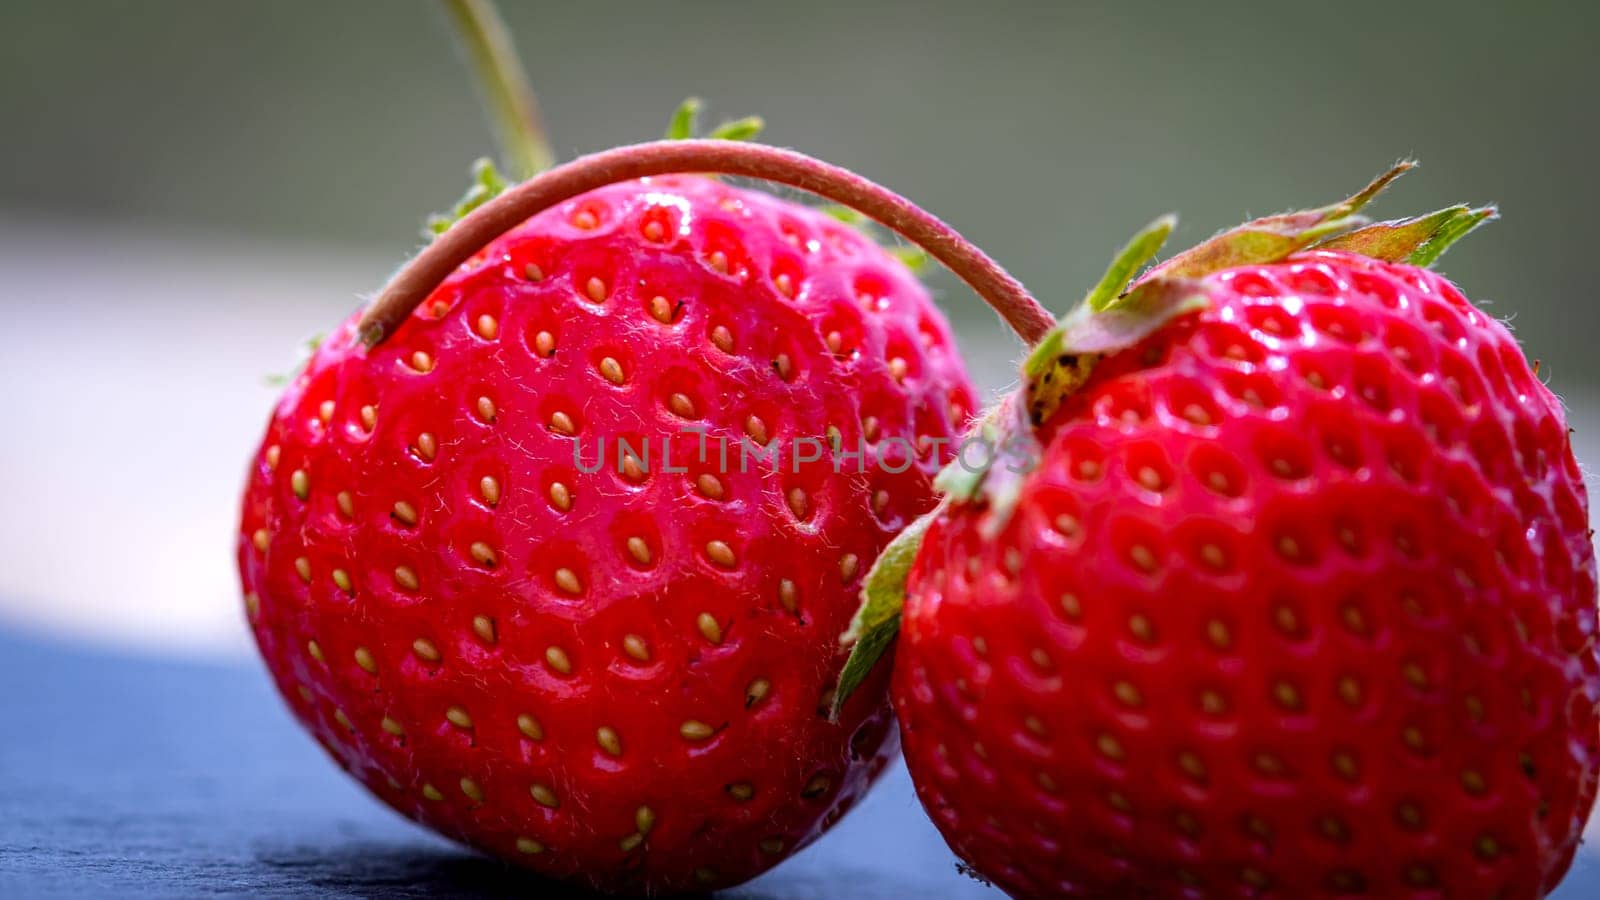 Close up of fresh strawberries showing seeds achenes. Details of fresh ripe red strawberries.